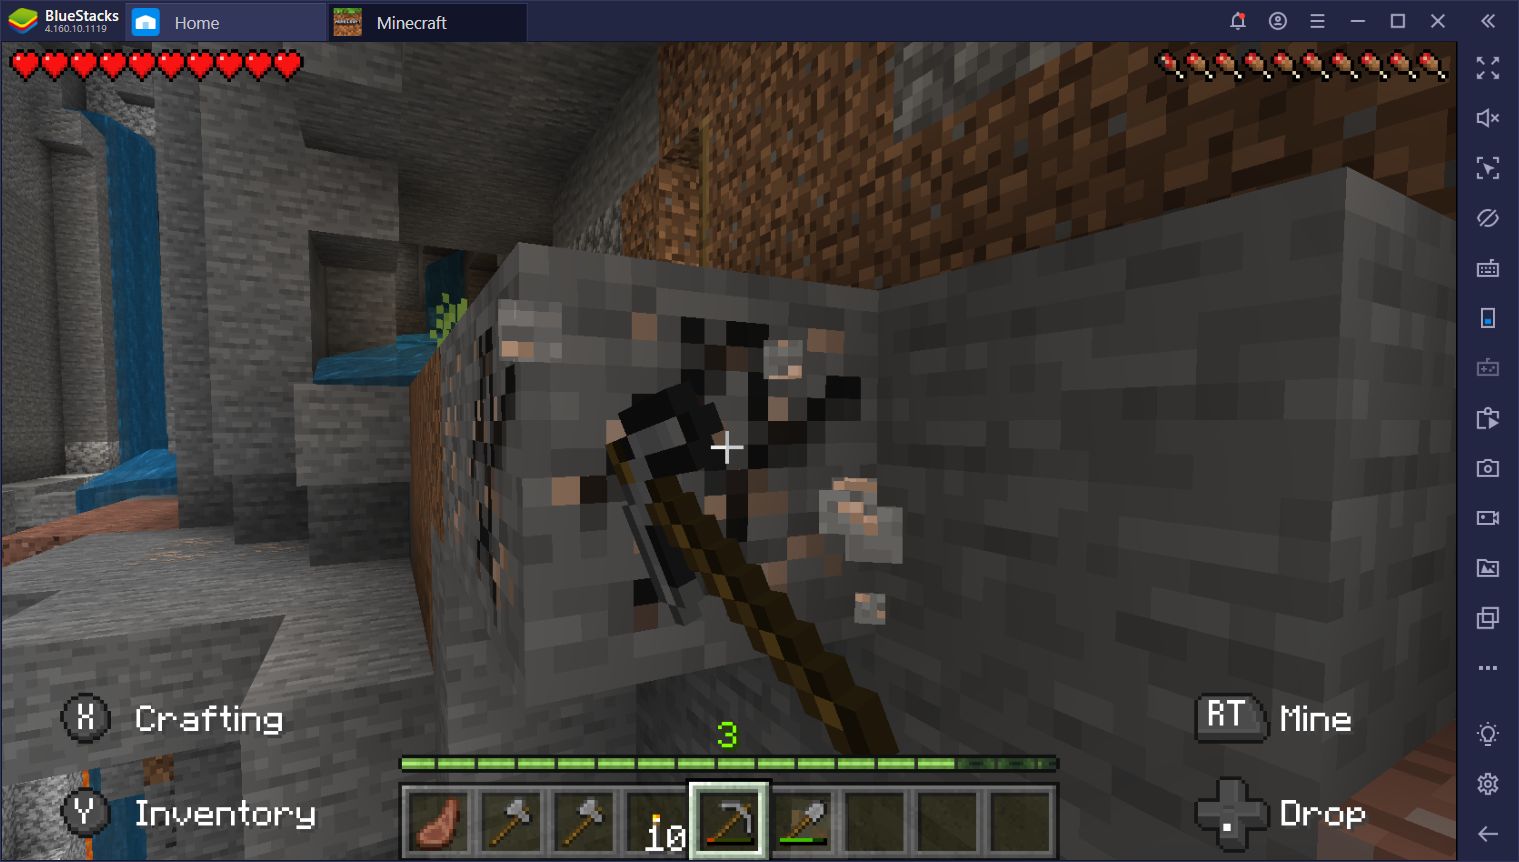 Mining In Minecraft How To Gather Materials And Stay Safe In The Process